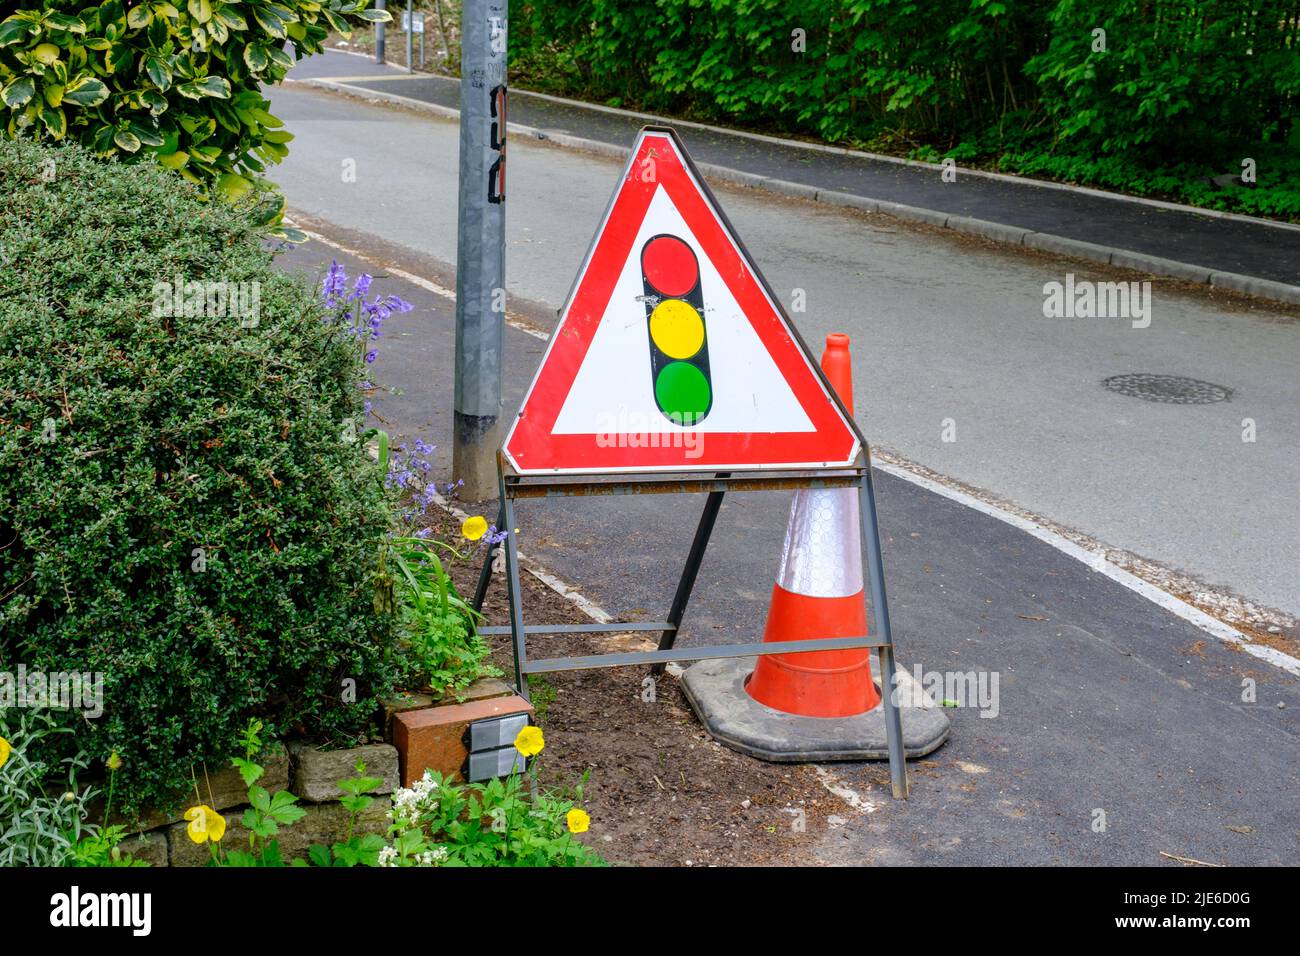 Traffic lights warning triangle sign on road in UK Stock Photo